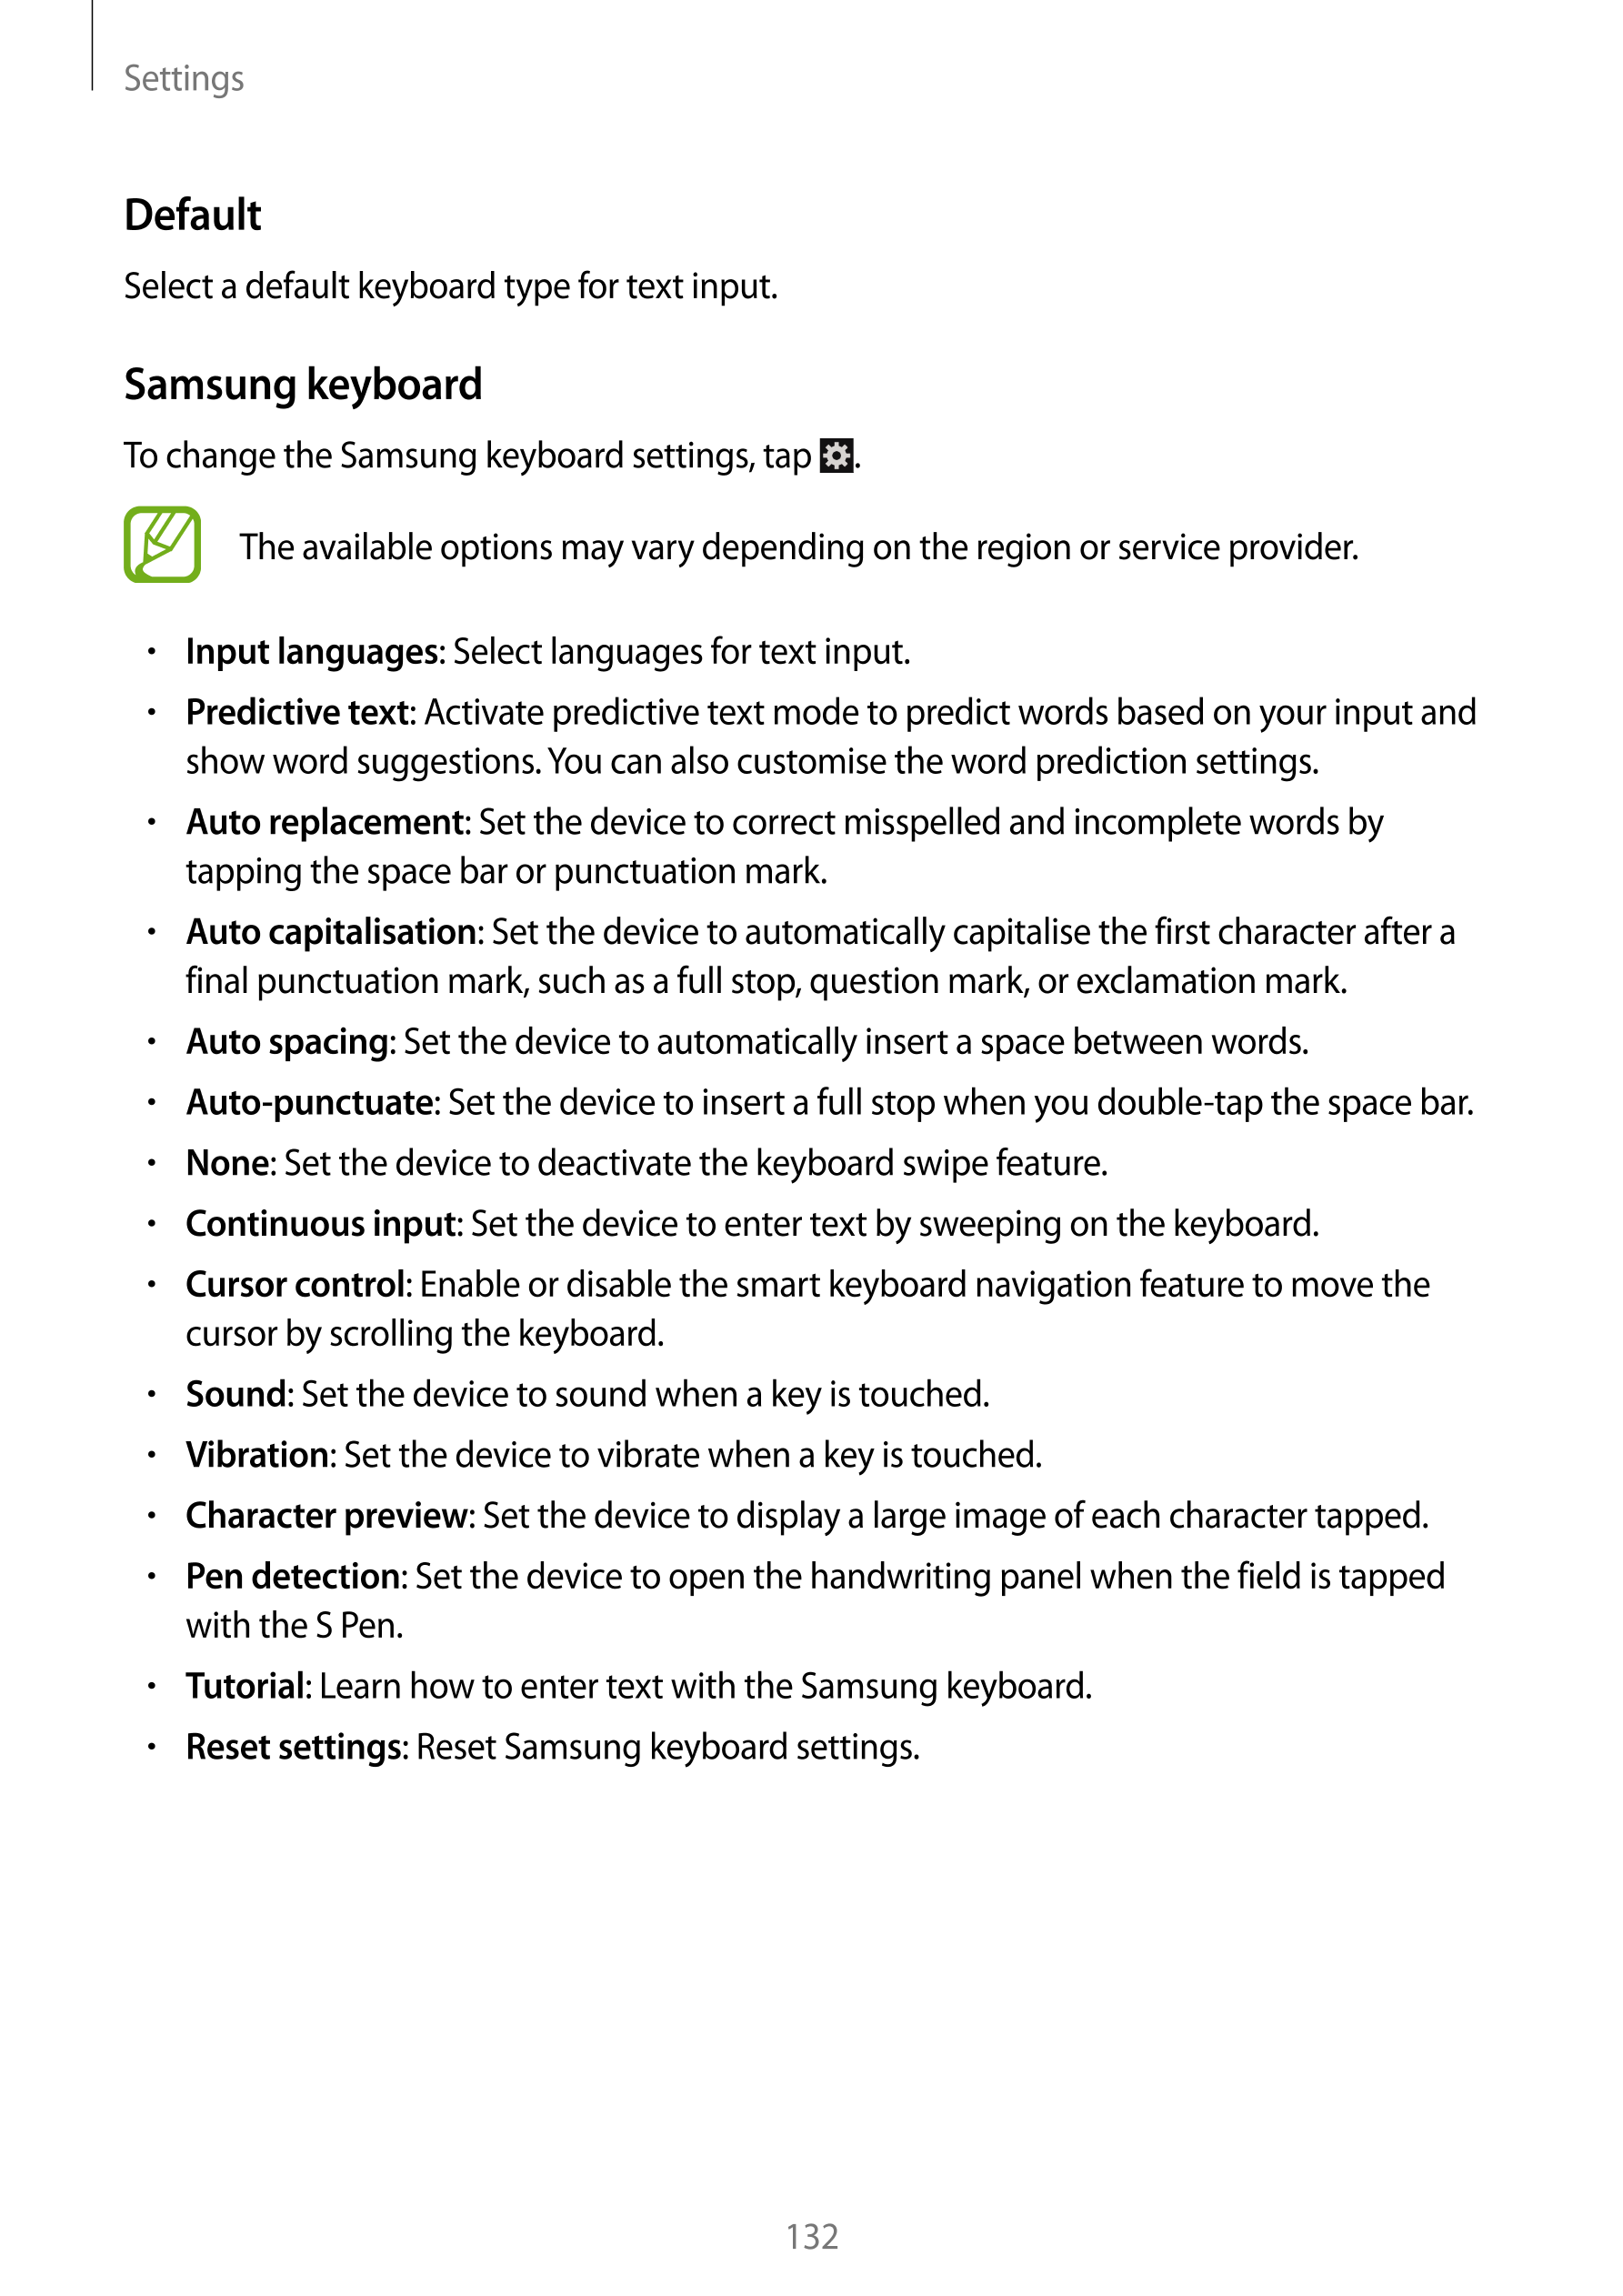 Settings
Default
Select a default keyboard type for text input.
Samsung keyboard
To change the Samsung keyboard settings, tap  .